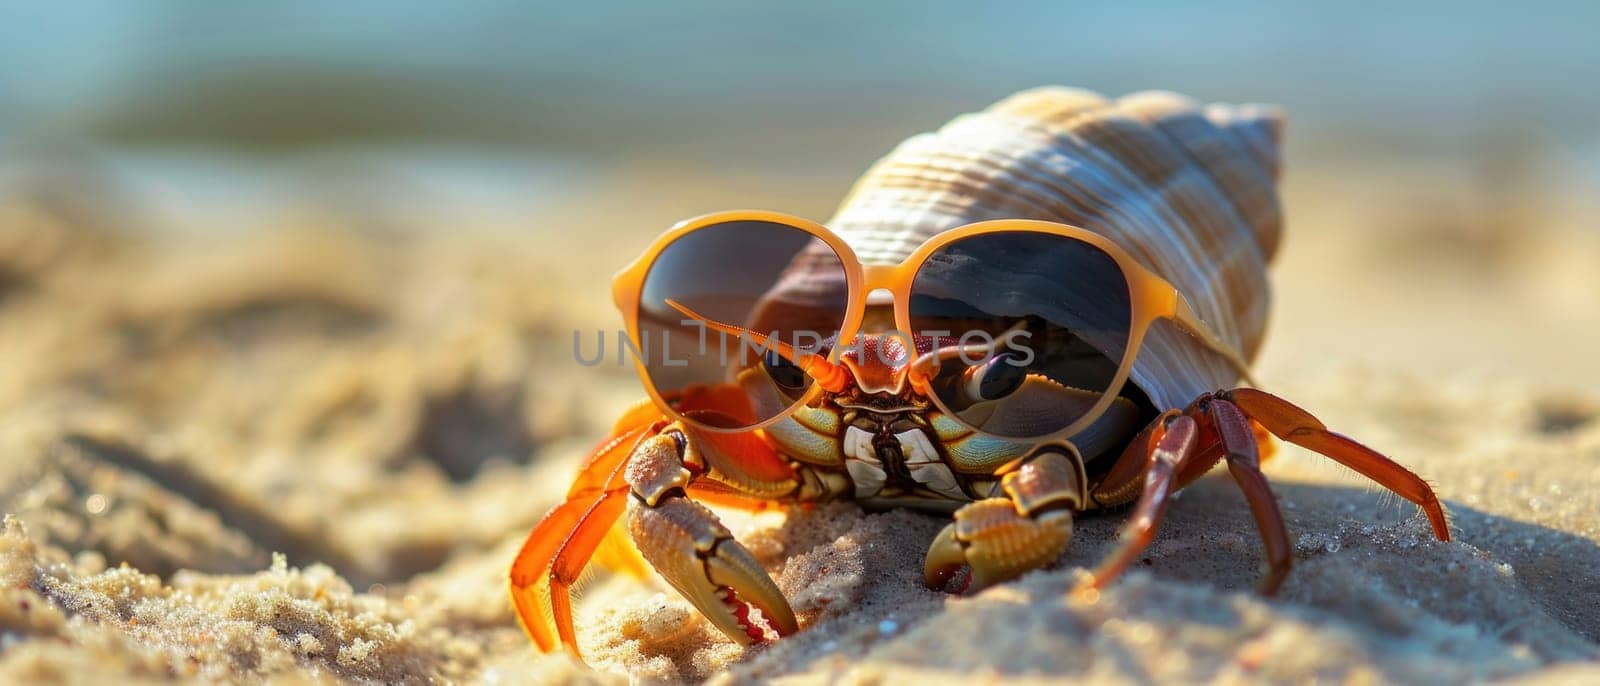 A crab wearing sunglasses is sitting on a sandy beach.